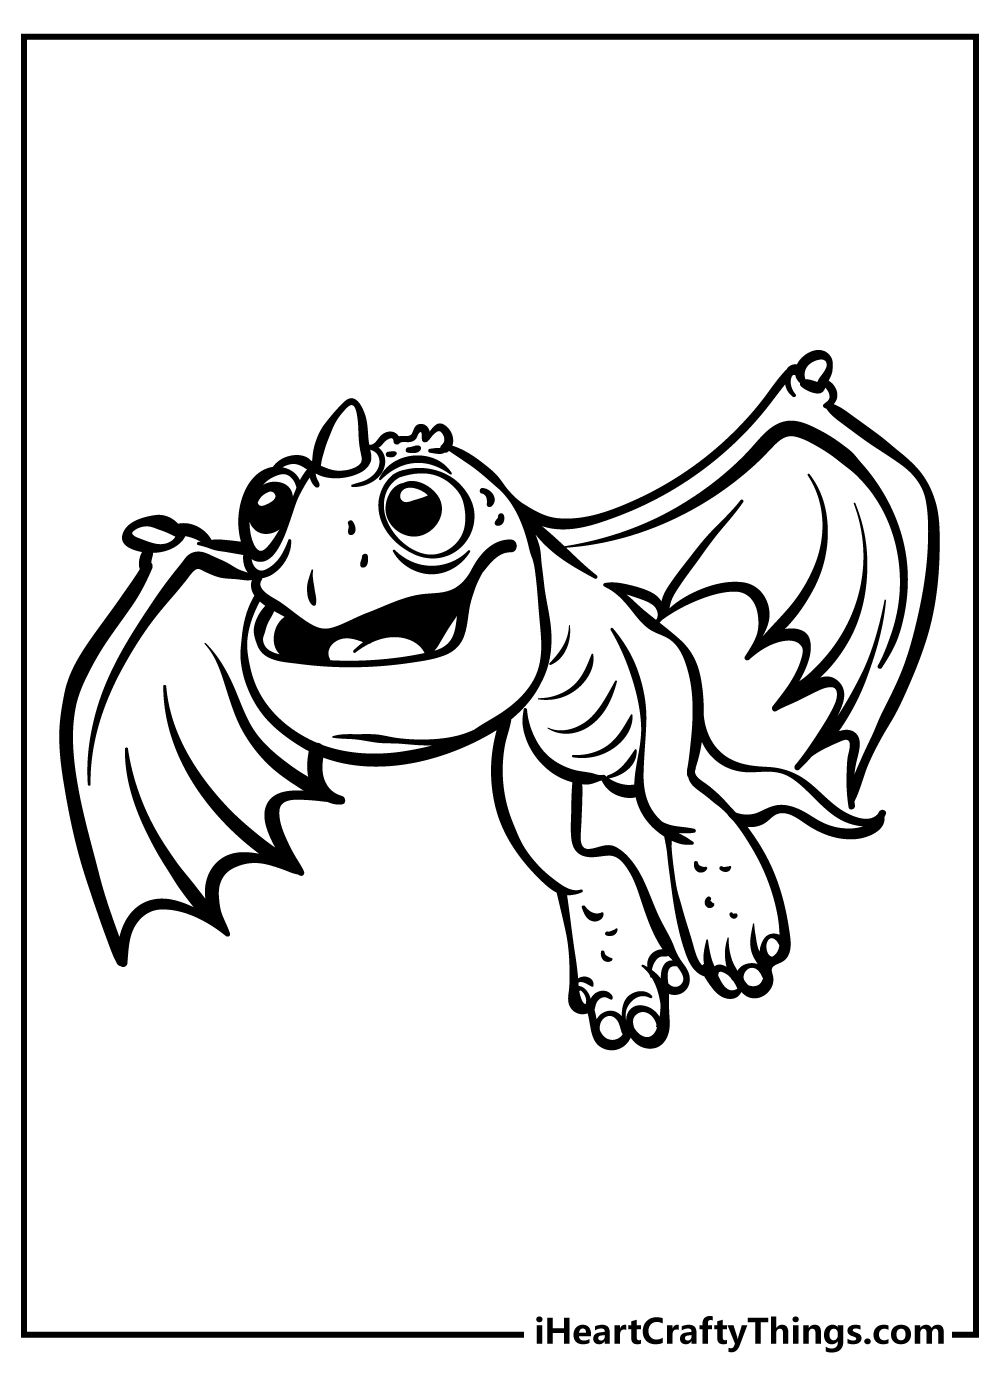 How To Train Your Dragon Coloring Book free printable